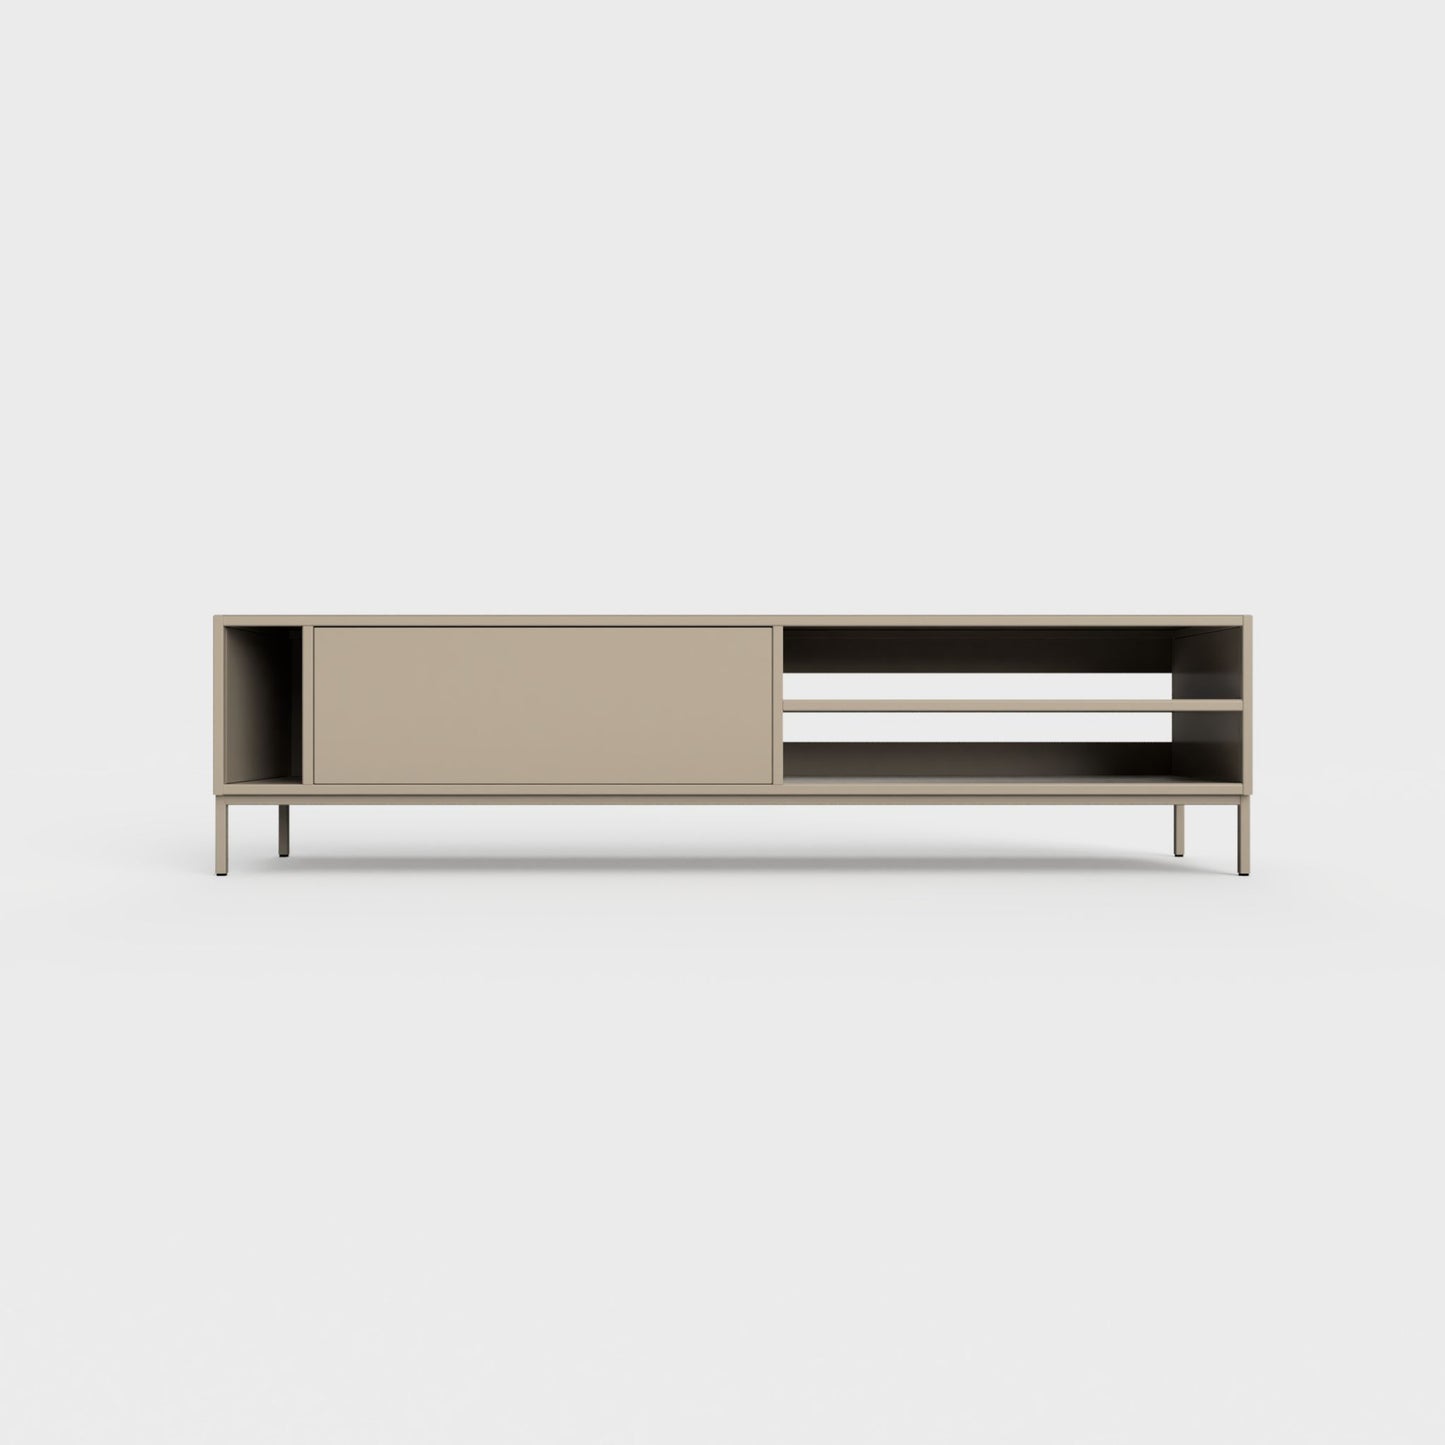 Prunus 03 Lowboard in khaki color, powder-coated steel, elegant and modern piece of furniture for your living room